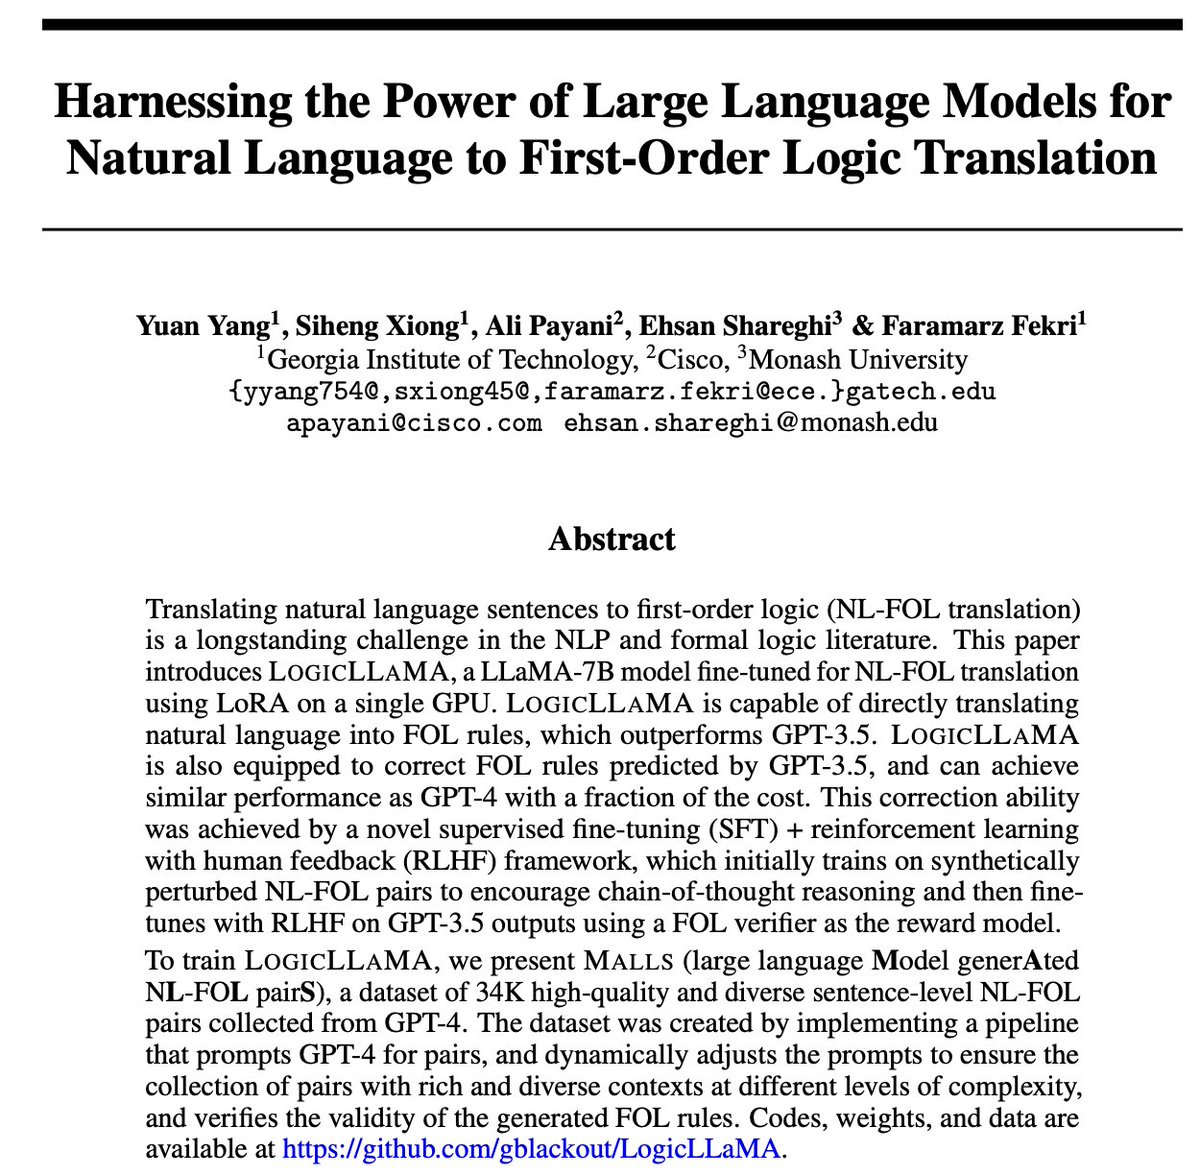 Translation of natural language into symbolic first-order logic is very foundational IMO. In this work we used the latest of the NLP/AI world (SFT+RLHF), to train a small LM which both corrects a GPT-3.5 and works as a standalone translation tool. #NLProc arxiv.org/pdf/2305.15541…